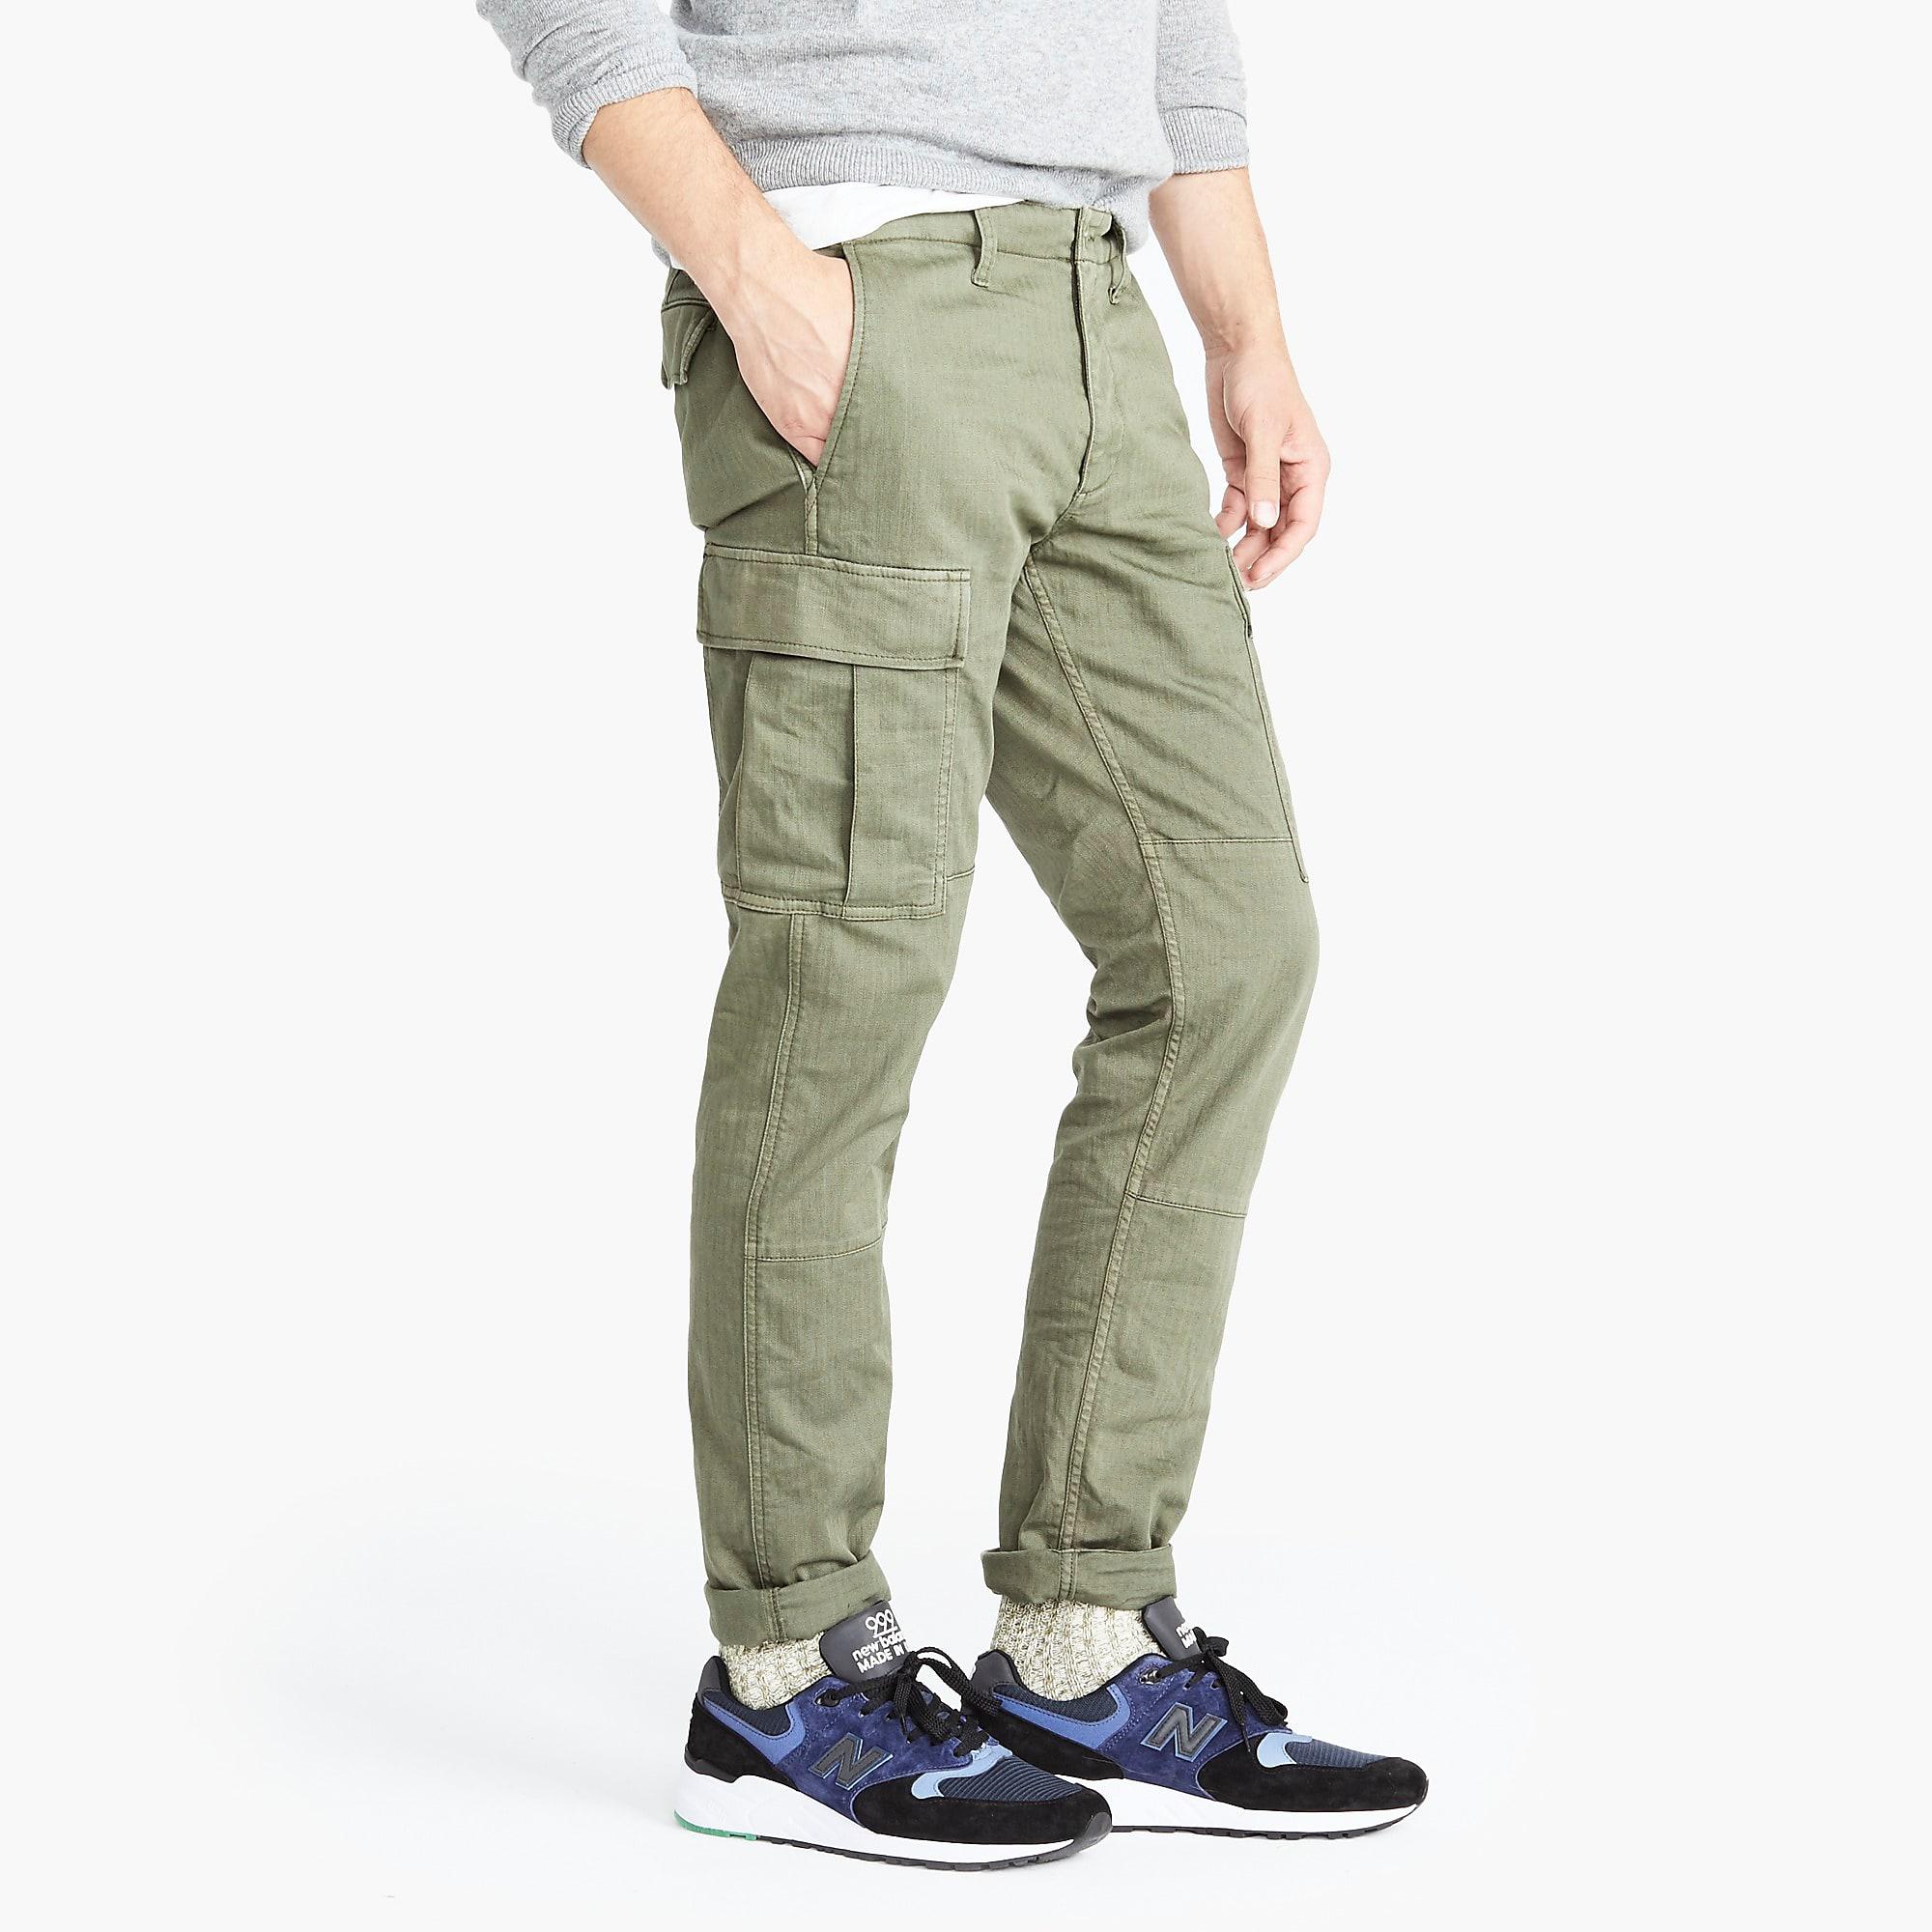 olive green slim fit cargo pants